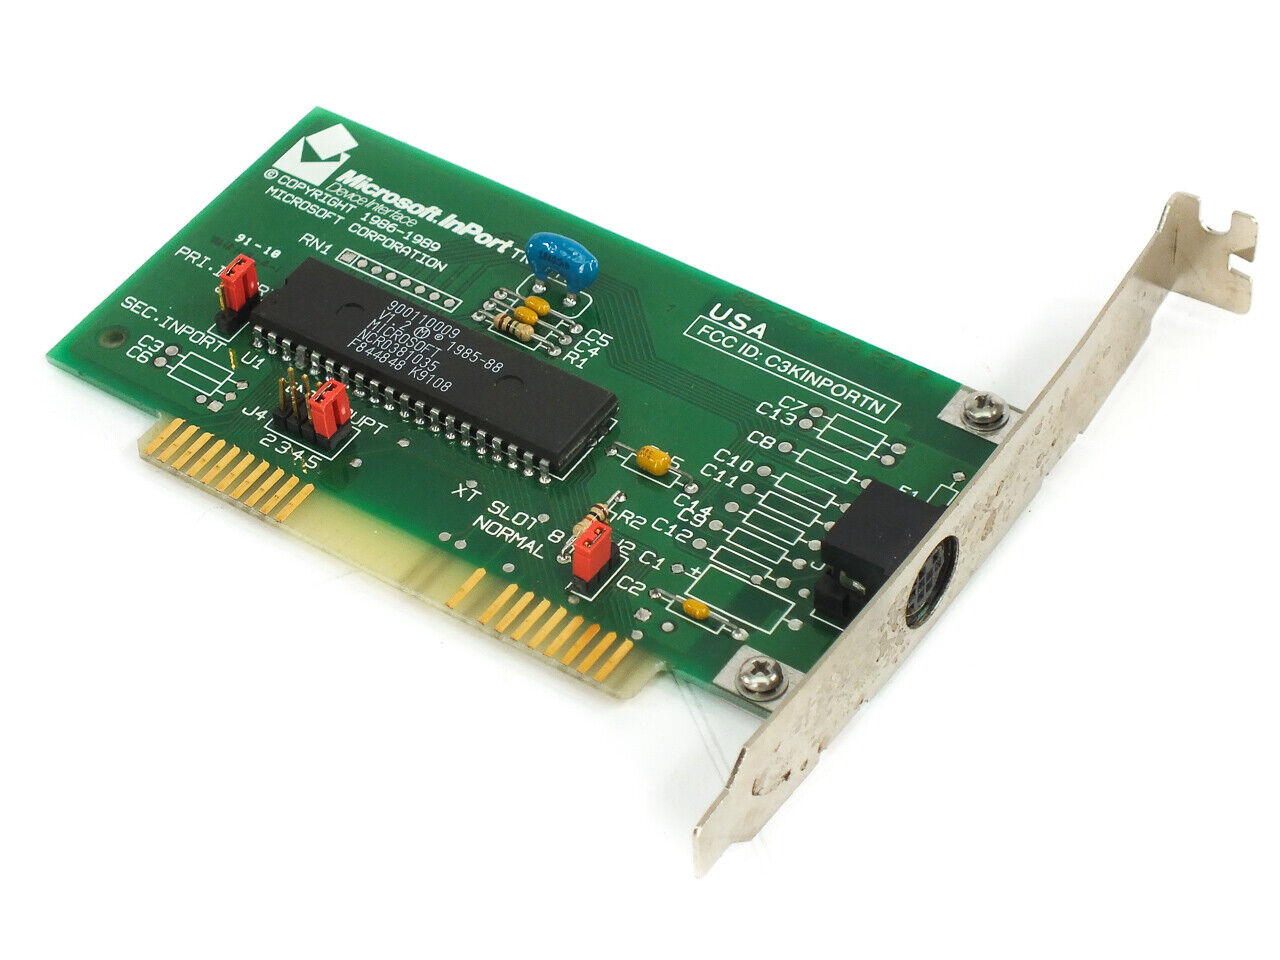 Microsoft 900-255-018 Rev P InPort Device Interface 8-bit ISA BUS Mouse Card